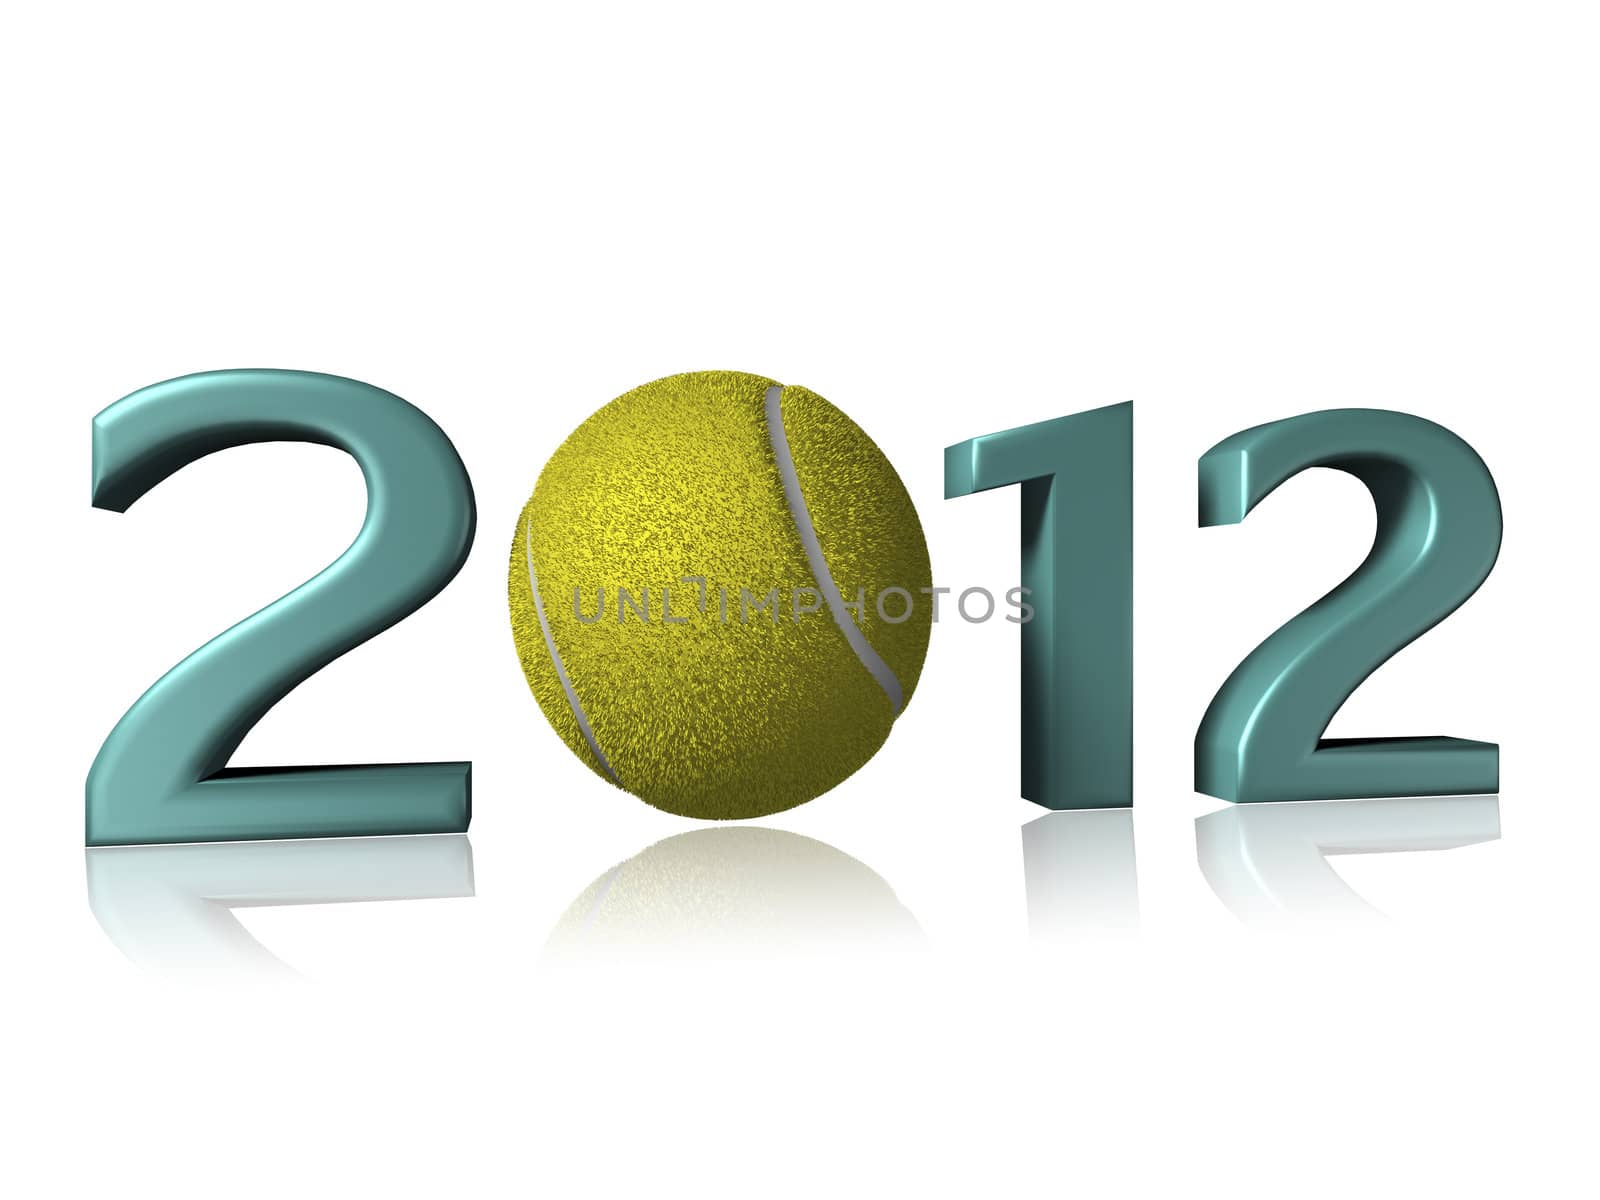 2012 tennis design on a white background with a little reflection